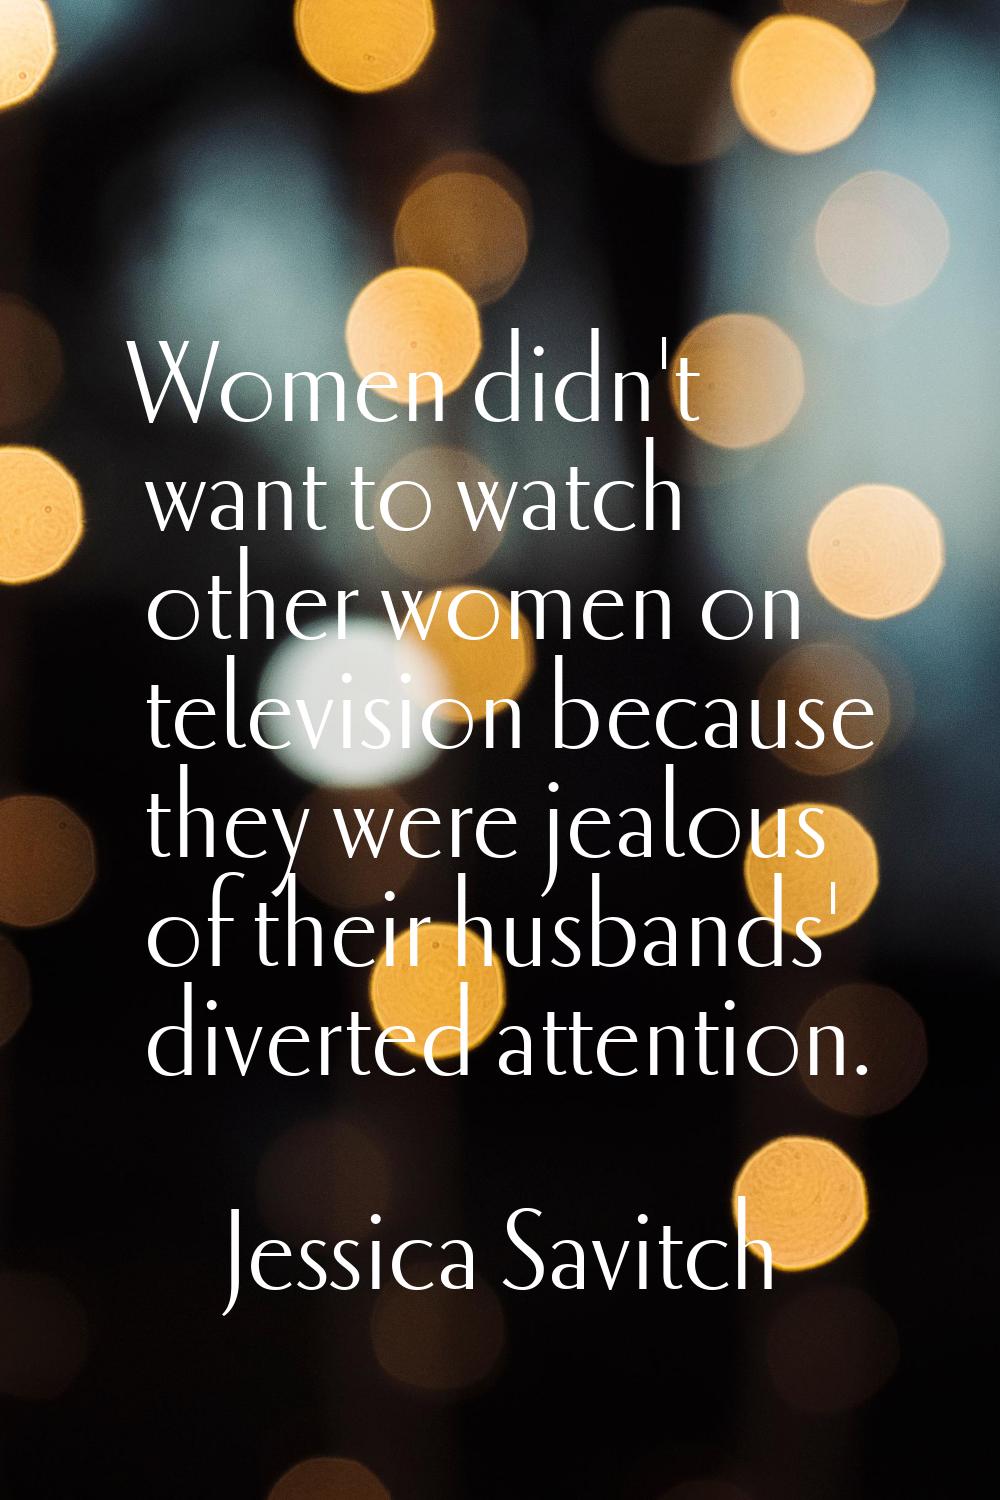 Women didn't want to watch other women on television because they were jealous of their husbands' d